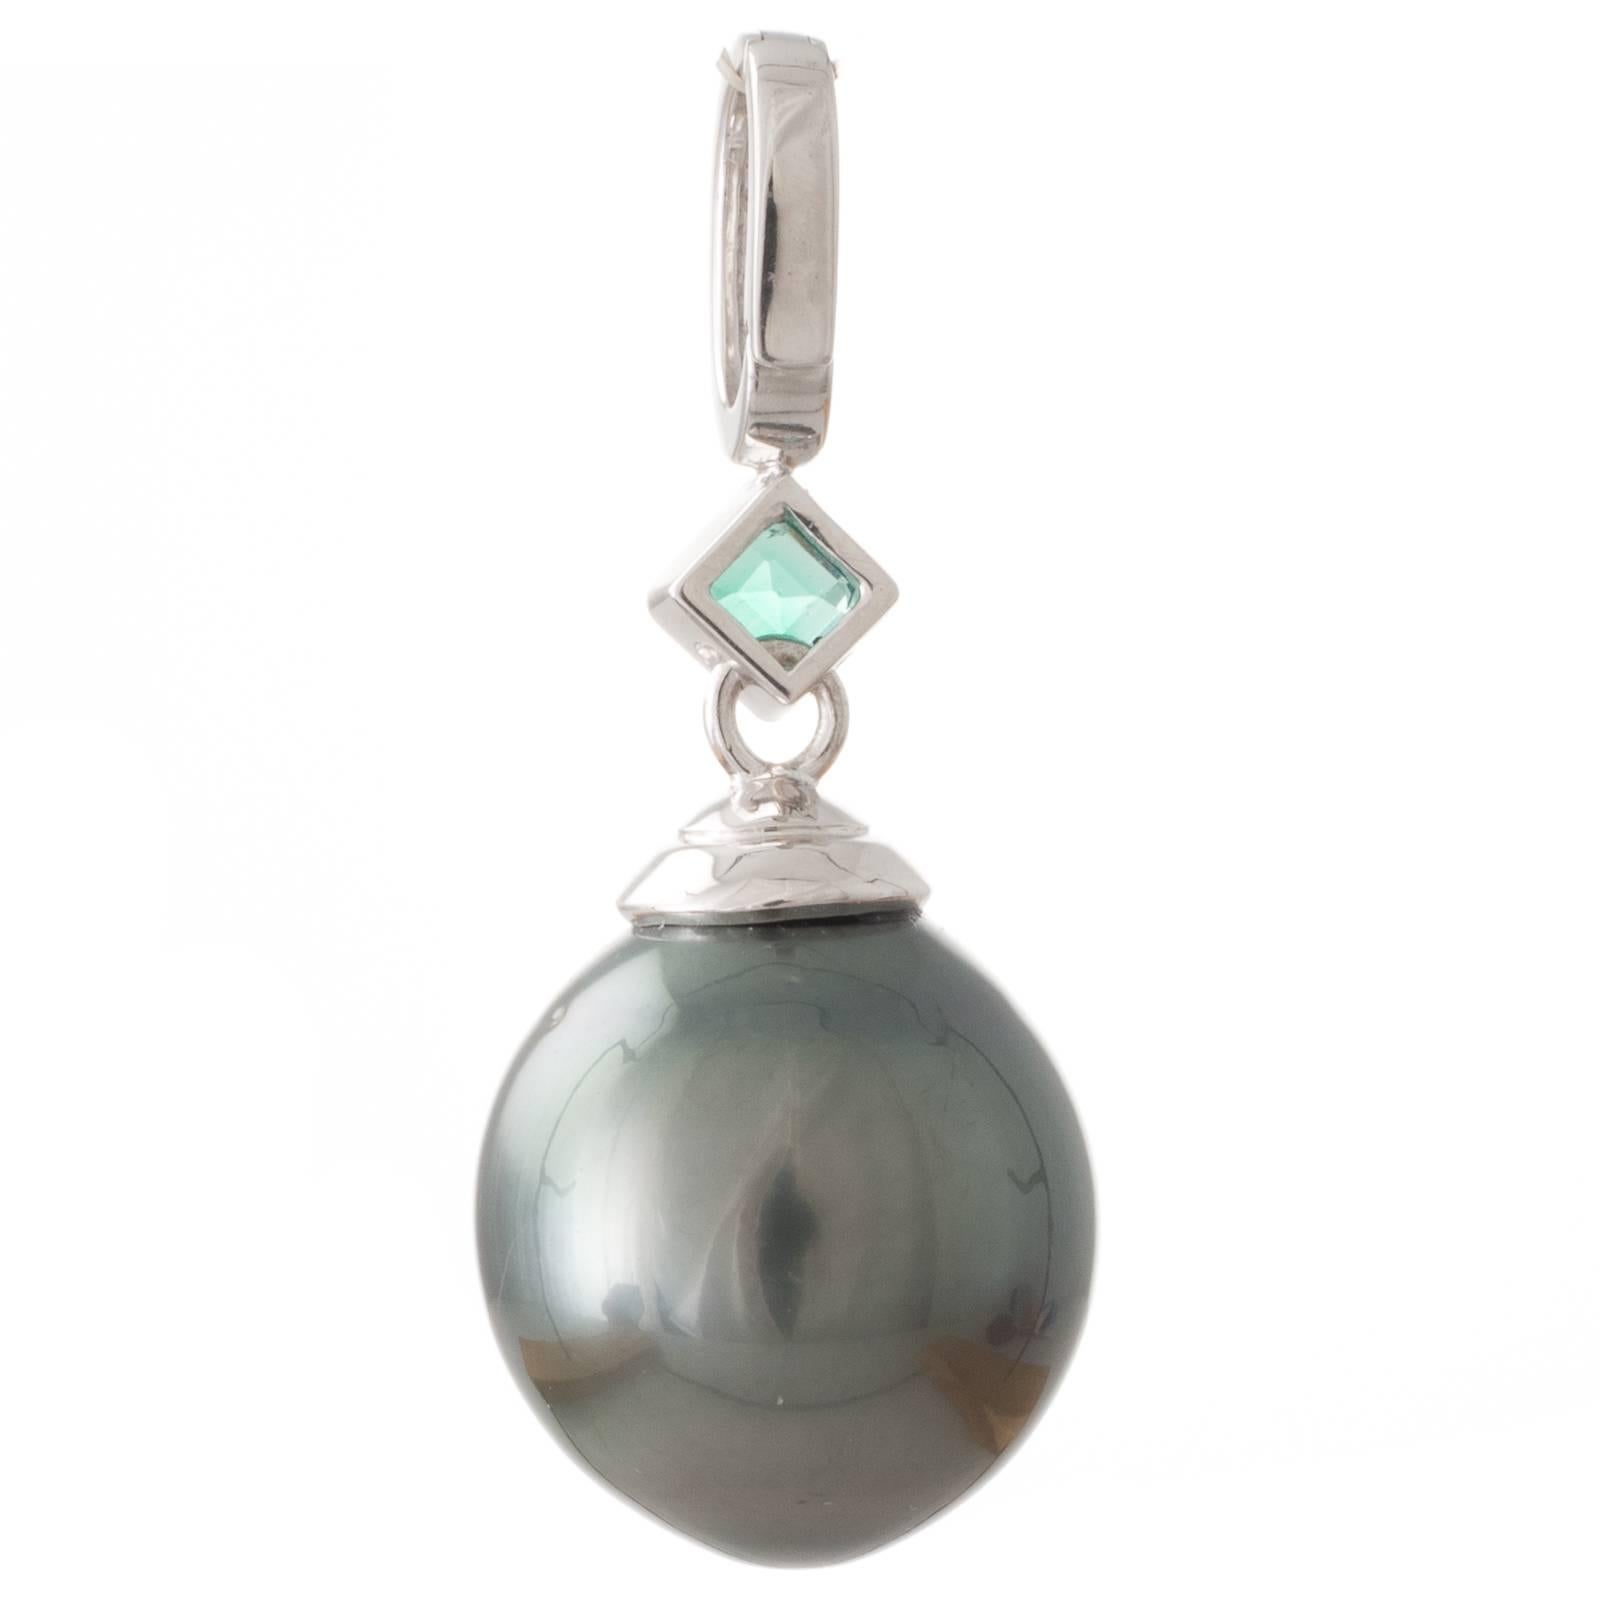 A Tahitian pearl 15-16mm oval/drop shape green hue with very good lustre and few natural surface marks near top of the pearl set as an enhancer pendant in 9ct white gold with diamond set clip atop a bezel set 0.25ct emerald cut emerald angled onto